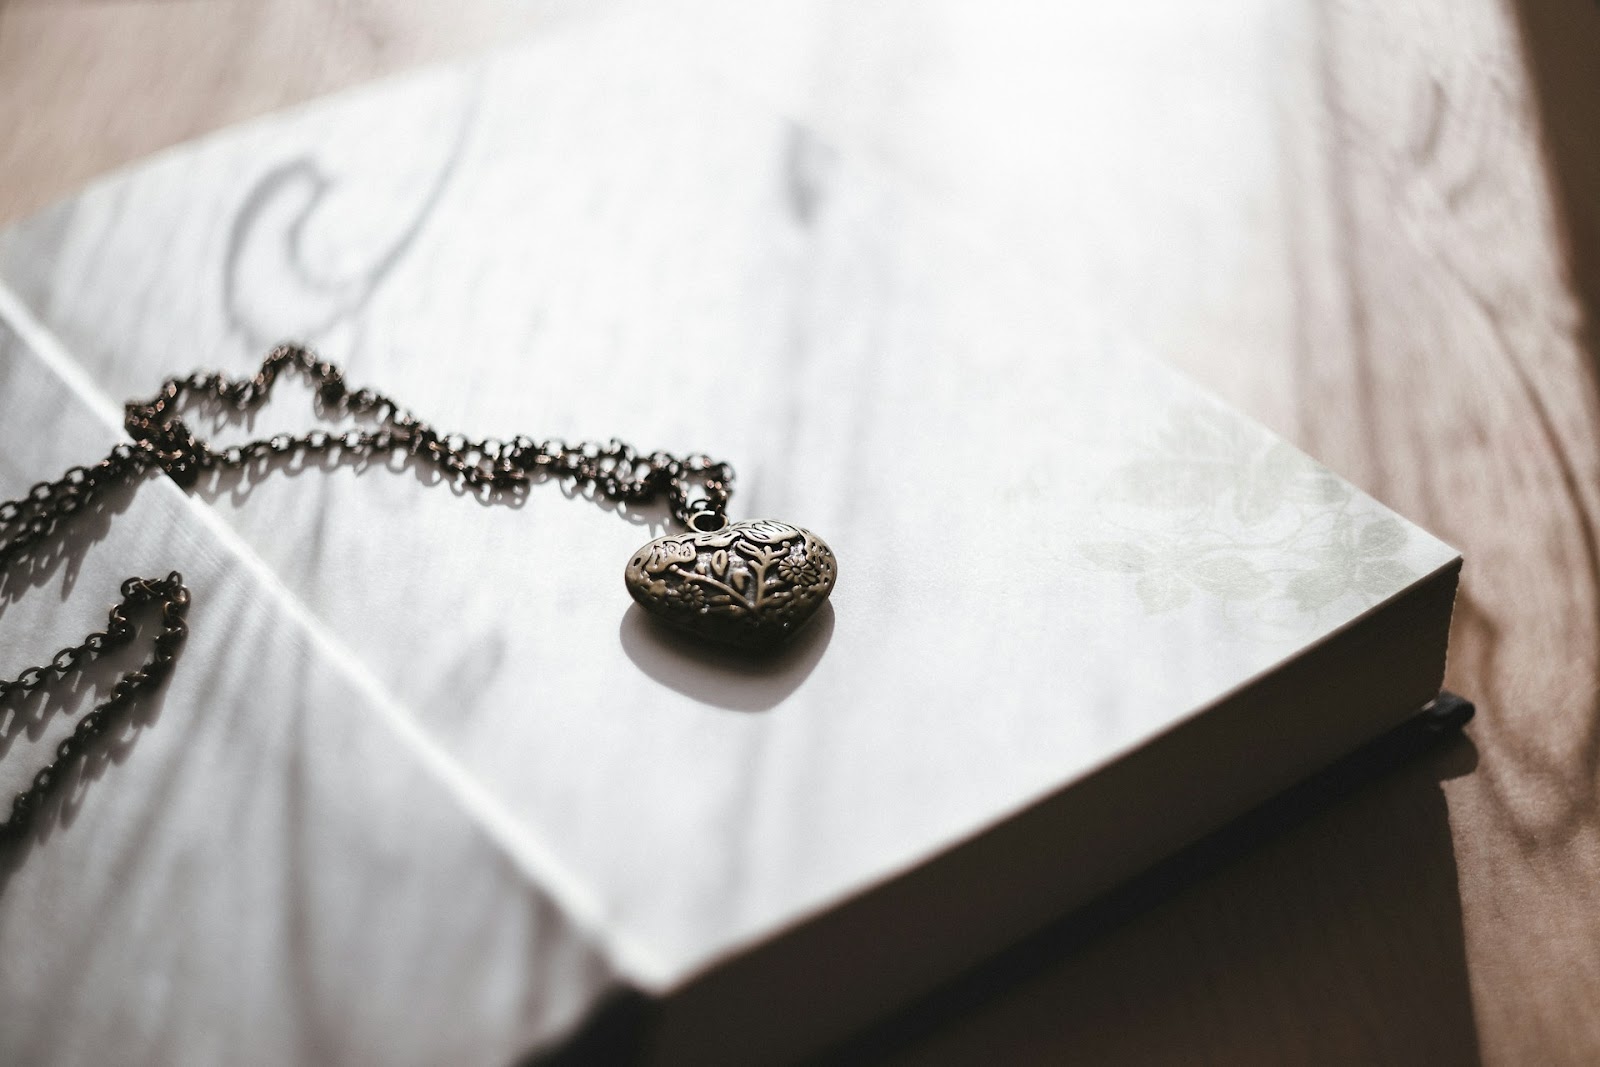 Valentine's Day gifts can be simple and more meaningful than other heart shaped jewelry that can look tacky. This locket is simple, beautiful, and customizable for your special girl.

Photo by <a href="https://unsplash.com/@freestocks?utm_content=creditCopyText&utm_medium=referral&utm_source=unsplash">freestocks</a> on <a href="https://unsplash.com/photos/silver-colored-necklace-with-pendant--1aE4Kpy-Qc?utm_content=creditCopyText&utm_medium=referral&utm_source=unsplash">Unsplash</a>
  